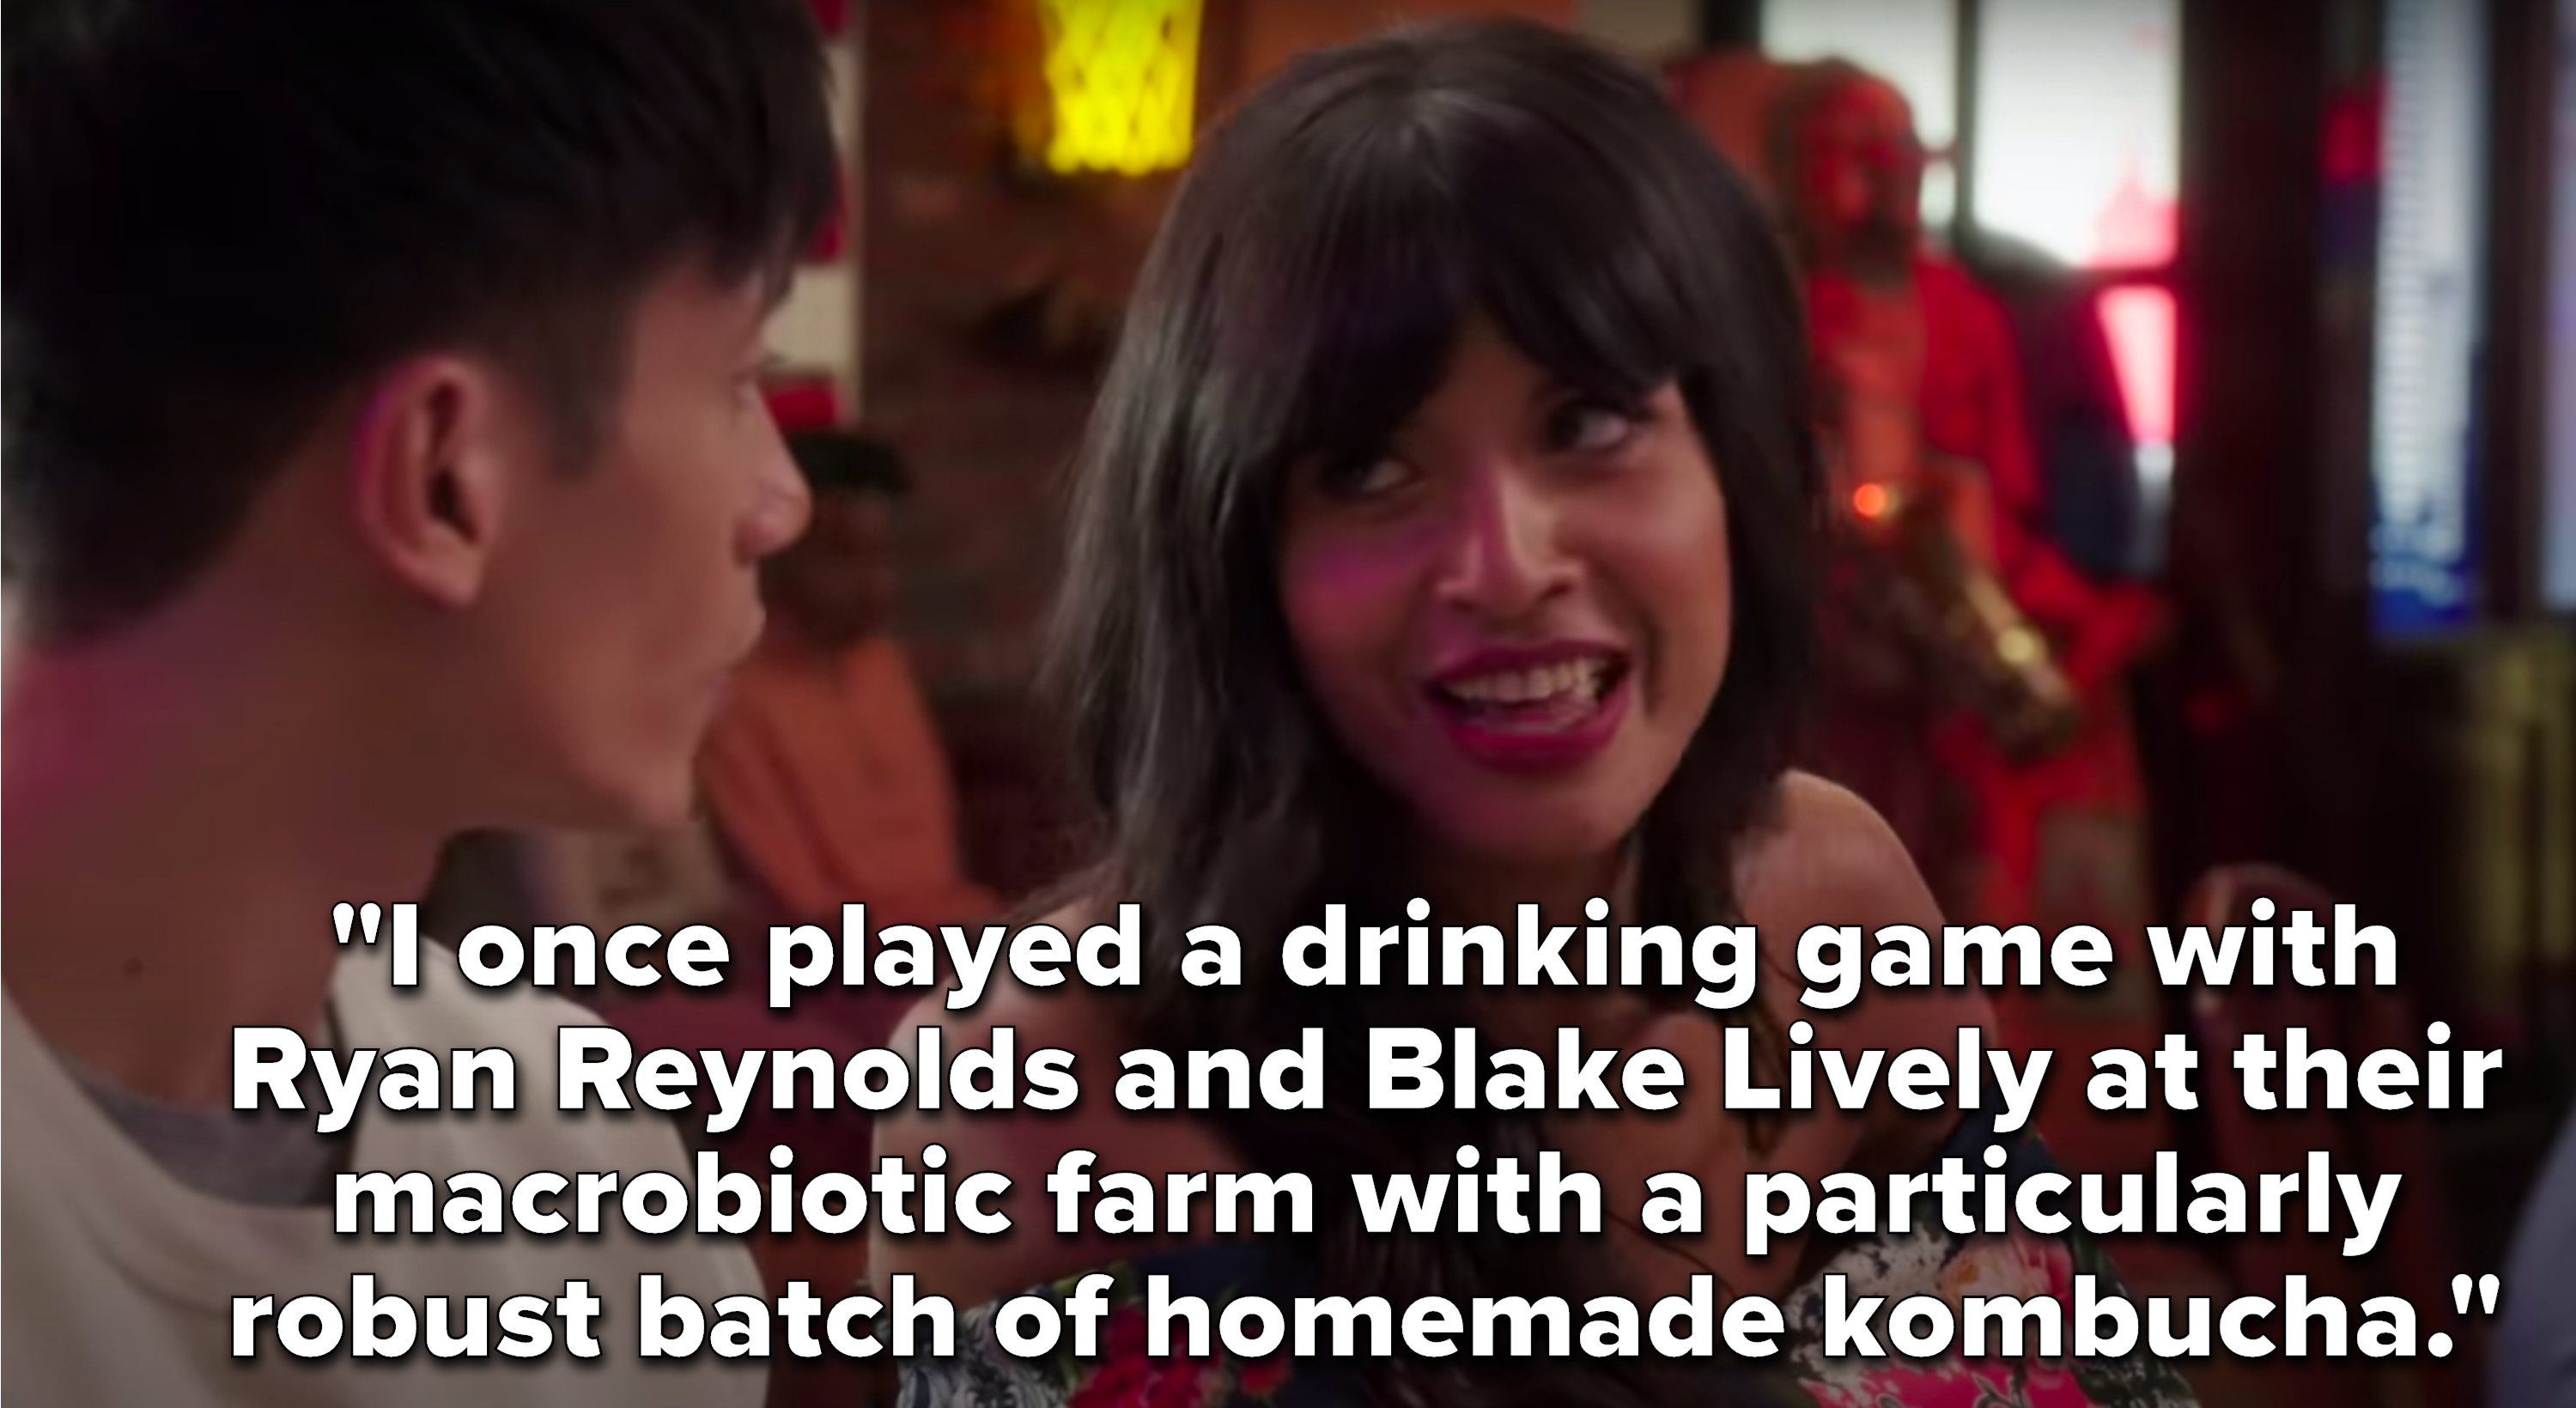 Tahani says, I once played a drinking game with Ryan Reynolds and Blake Lively at their macrobiotic farm with a particularly robust batch of homemade kombucha